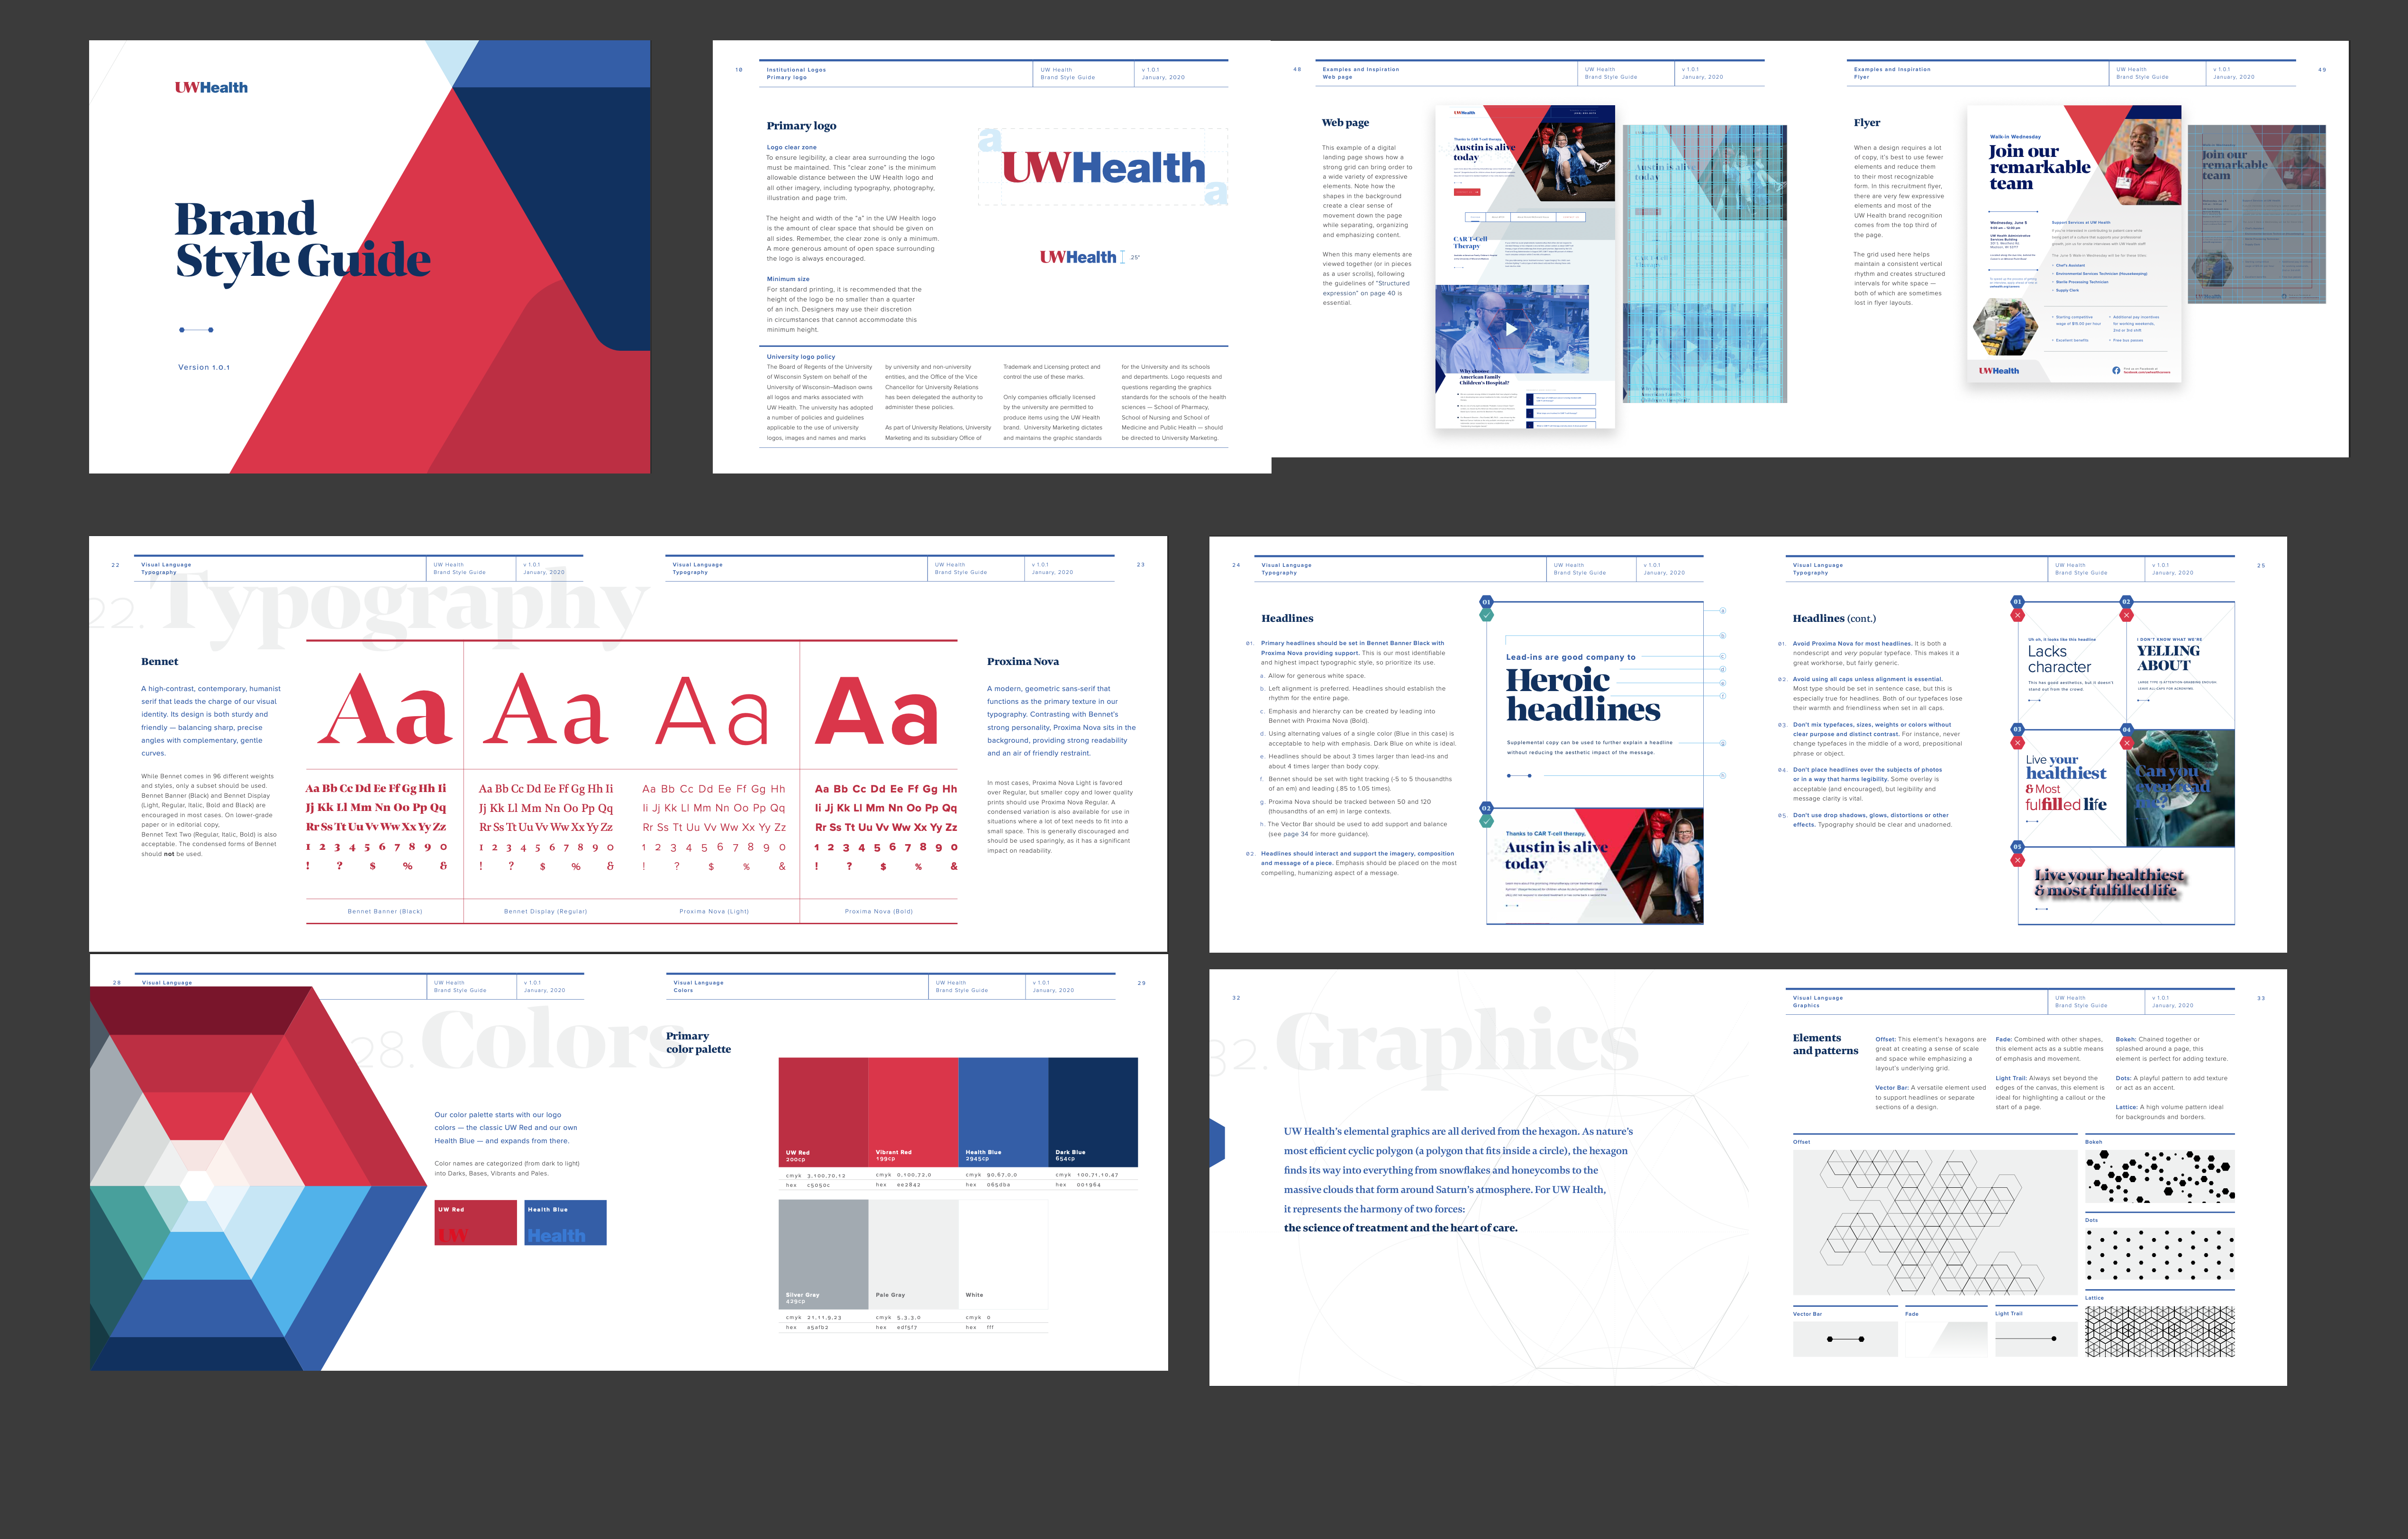 Set of pages from the UW Health brand guideline